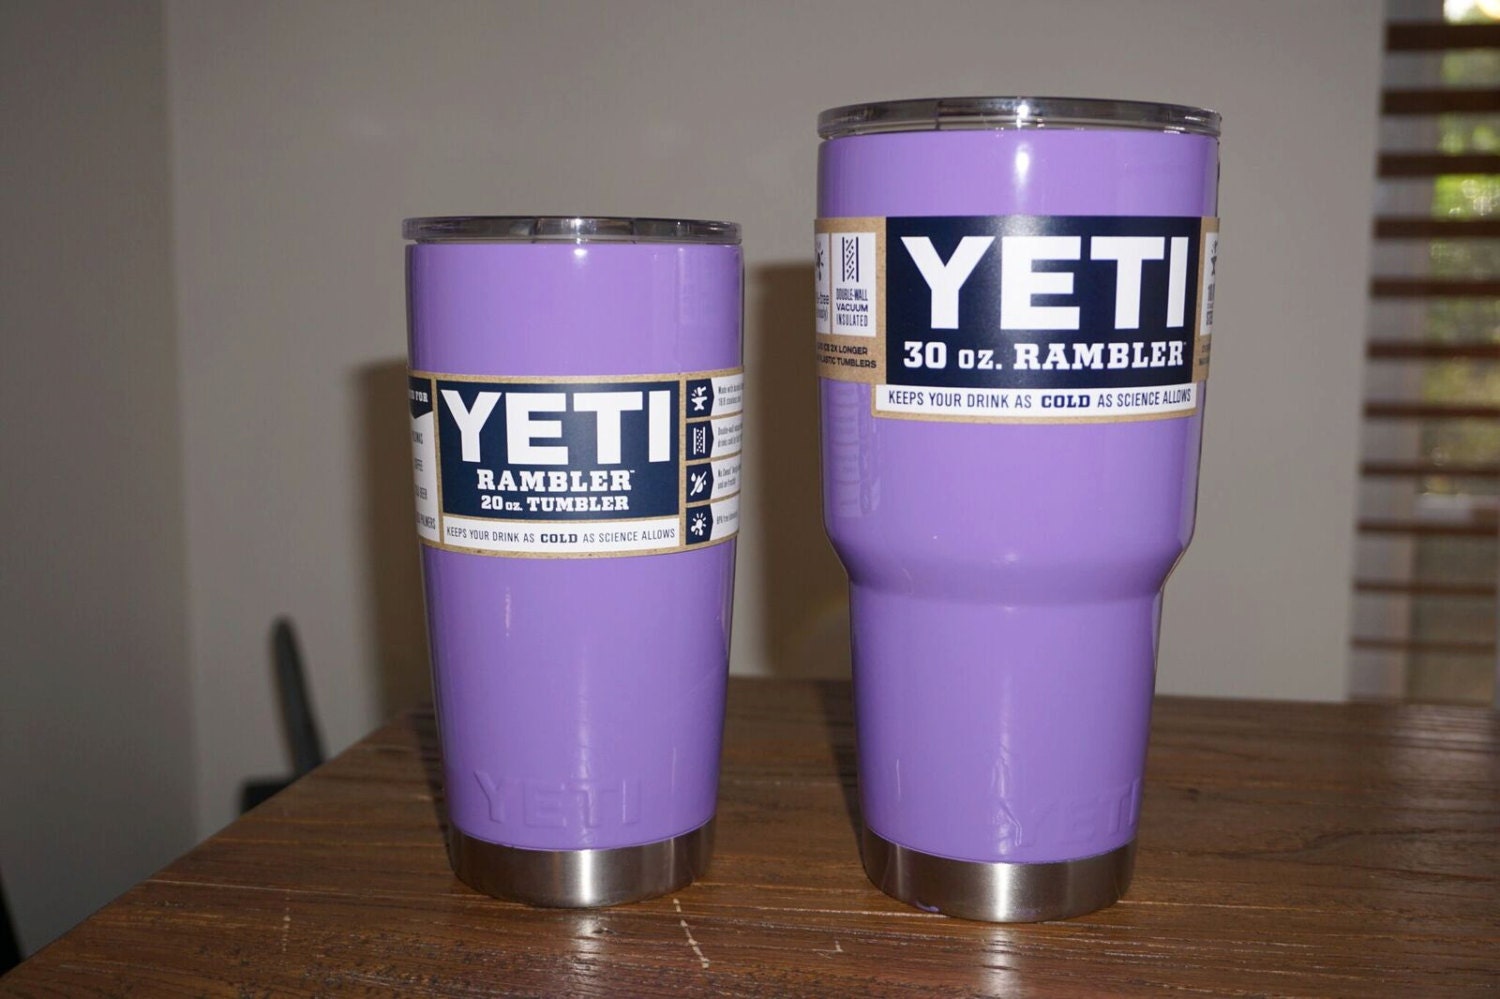 Custom Colored Yeti Rambler 30 Oz Powder Coated Lavender W Effy Moom Free Coloring Picture wallpaper give a chance to color on the wall without getting in trouble! Fill the walls of your home or office with stress-relieving [effymoom.blogspot.com]